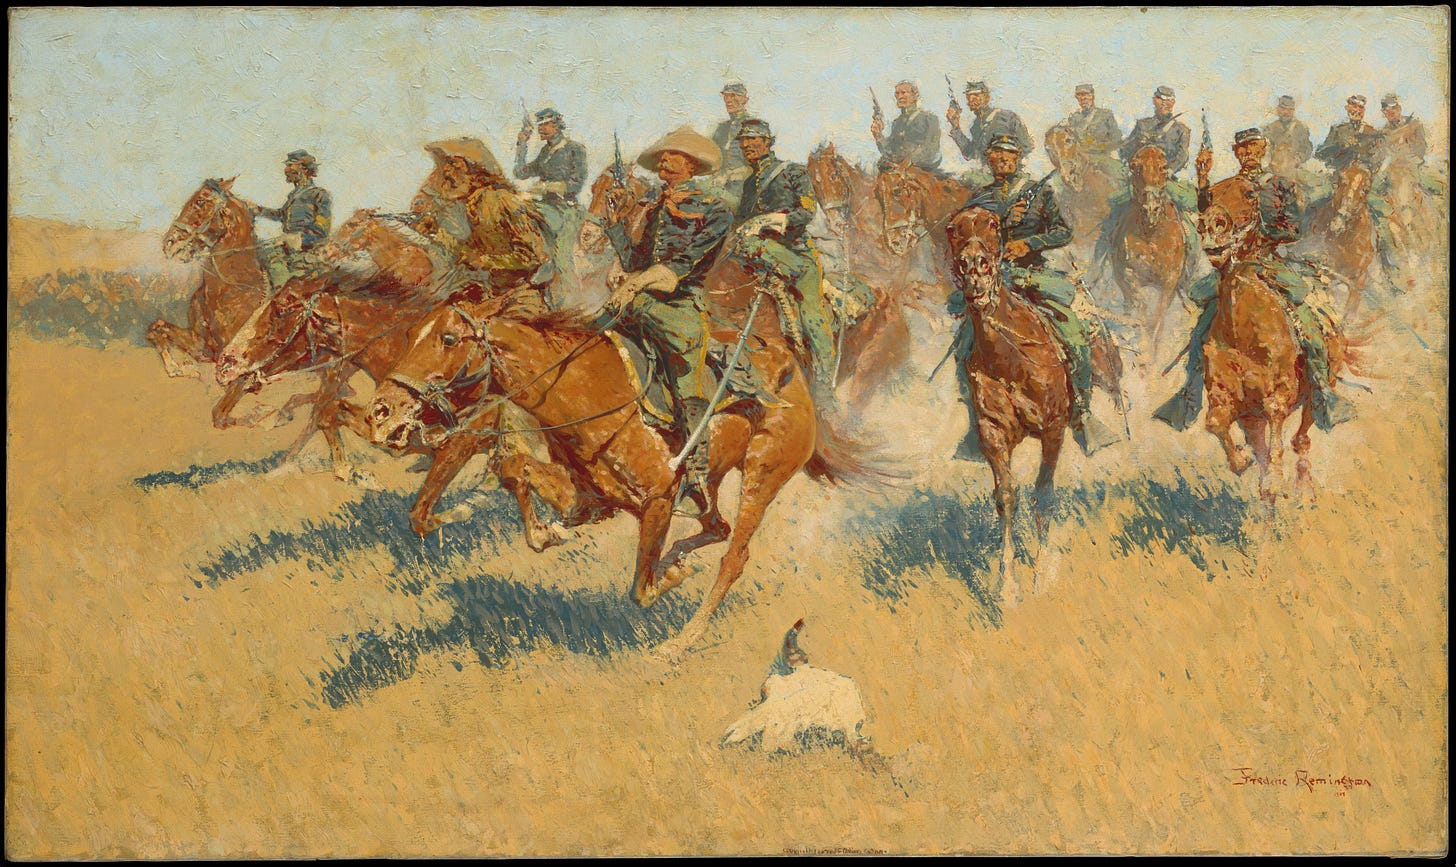 File:Cavalry Charge on the Southern Plains.jpg - Wikipedia